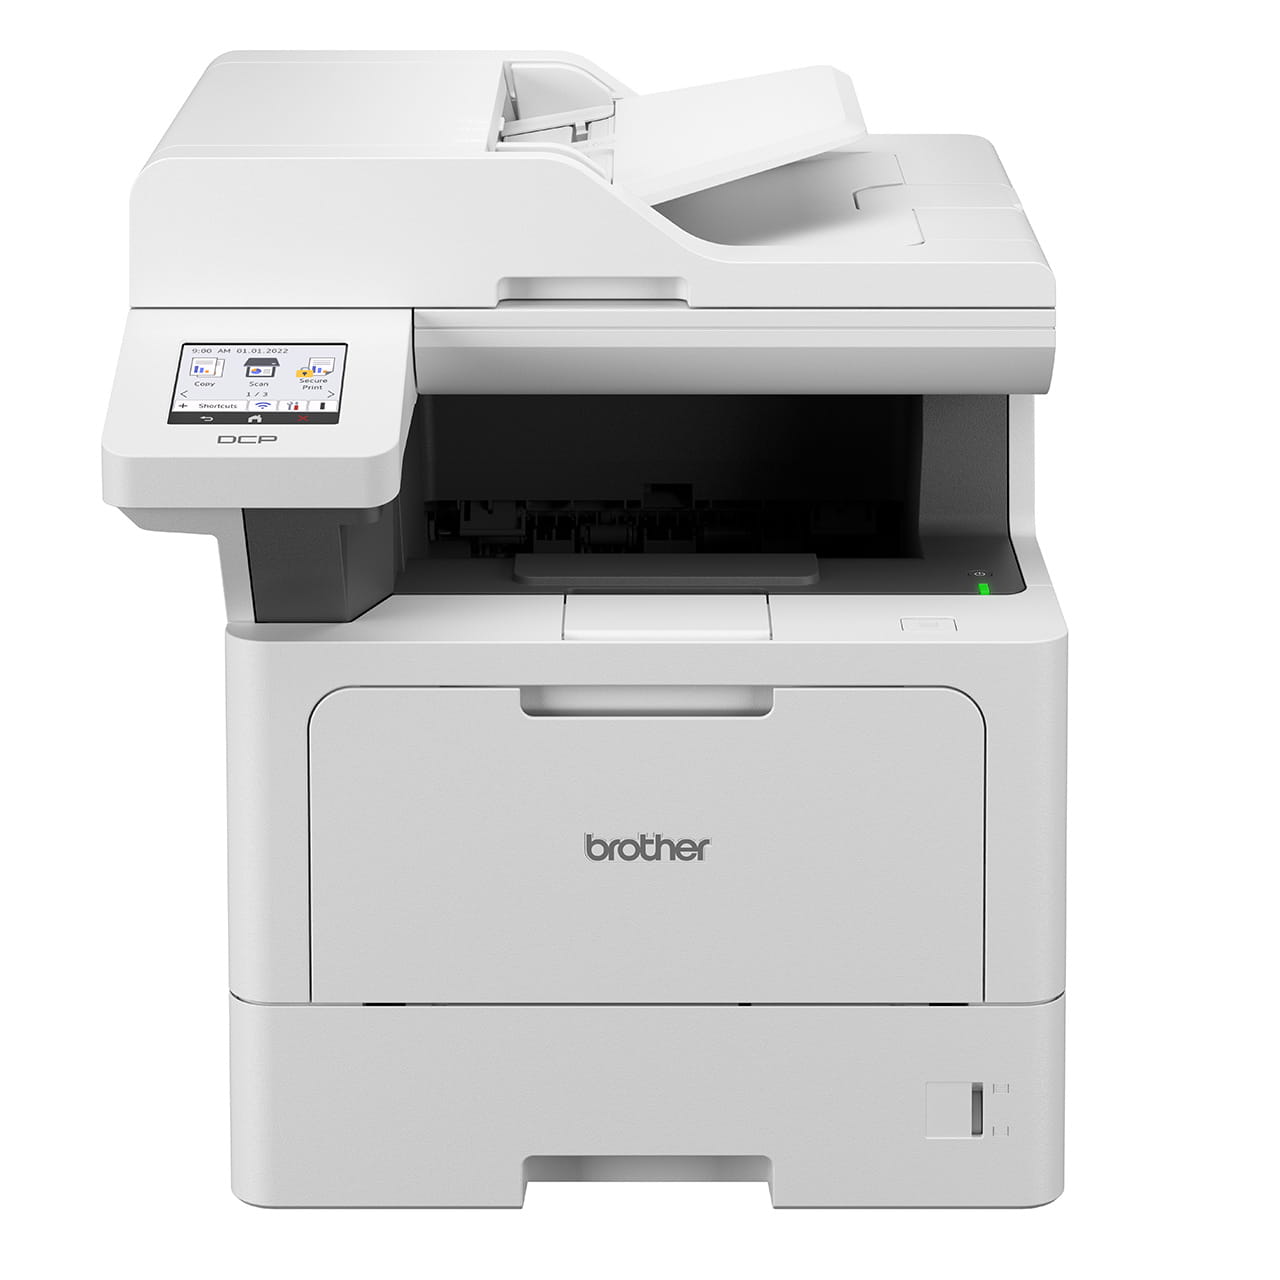 Brother DCP-L5510DW Mono Laser Printer Front View